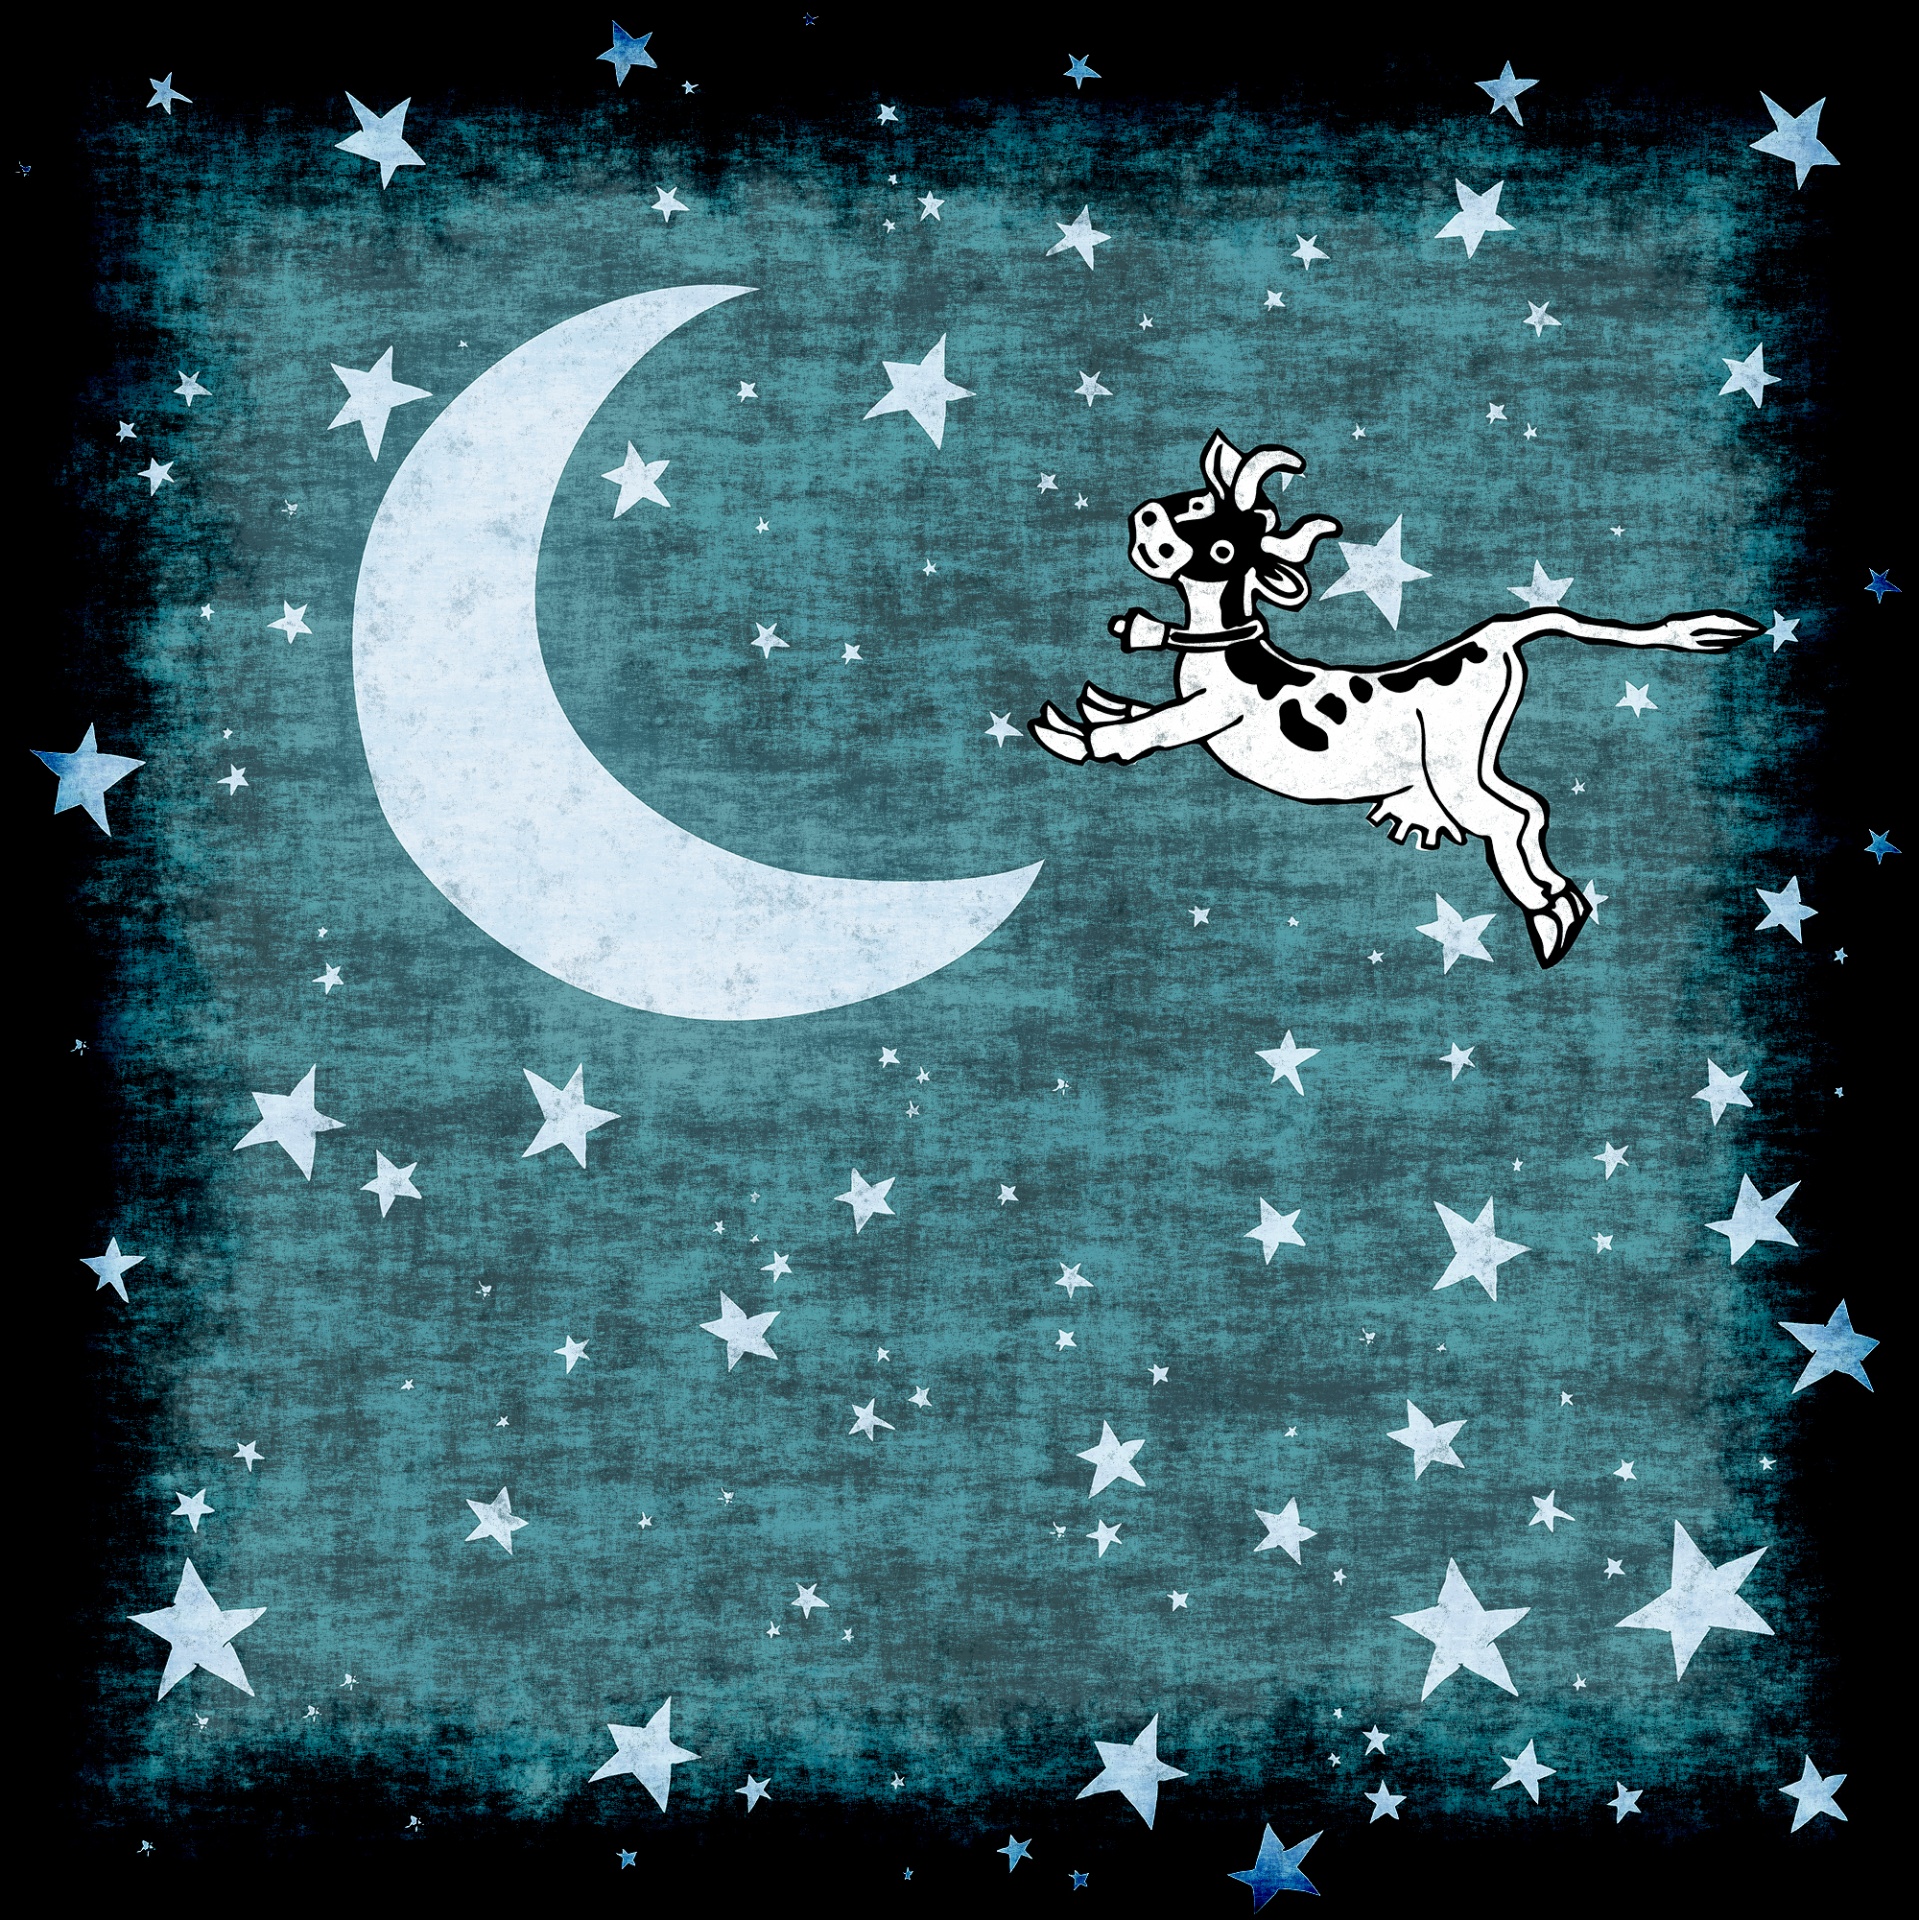 cartoon of a cow jumping over the moon - blue turquoise color with dark grunge border